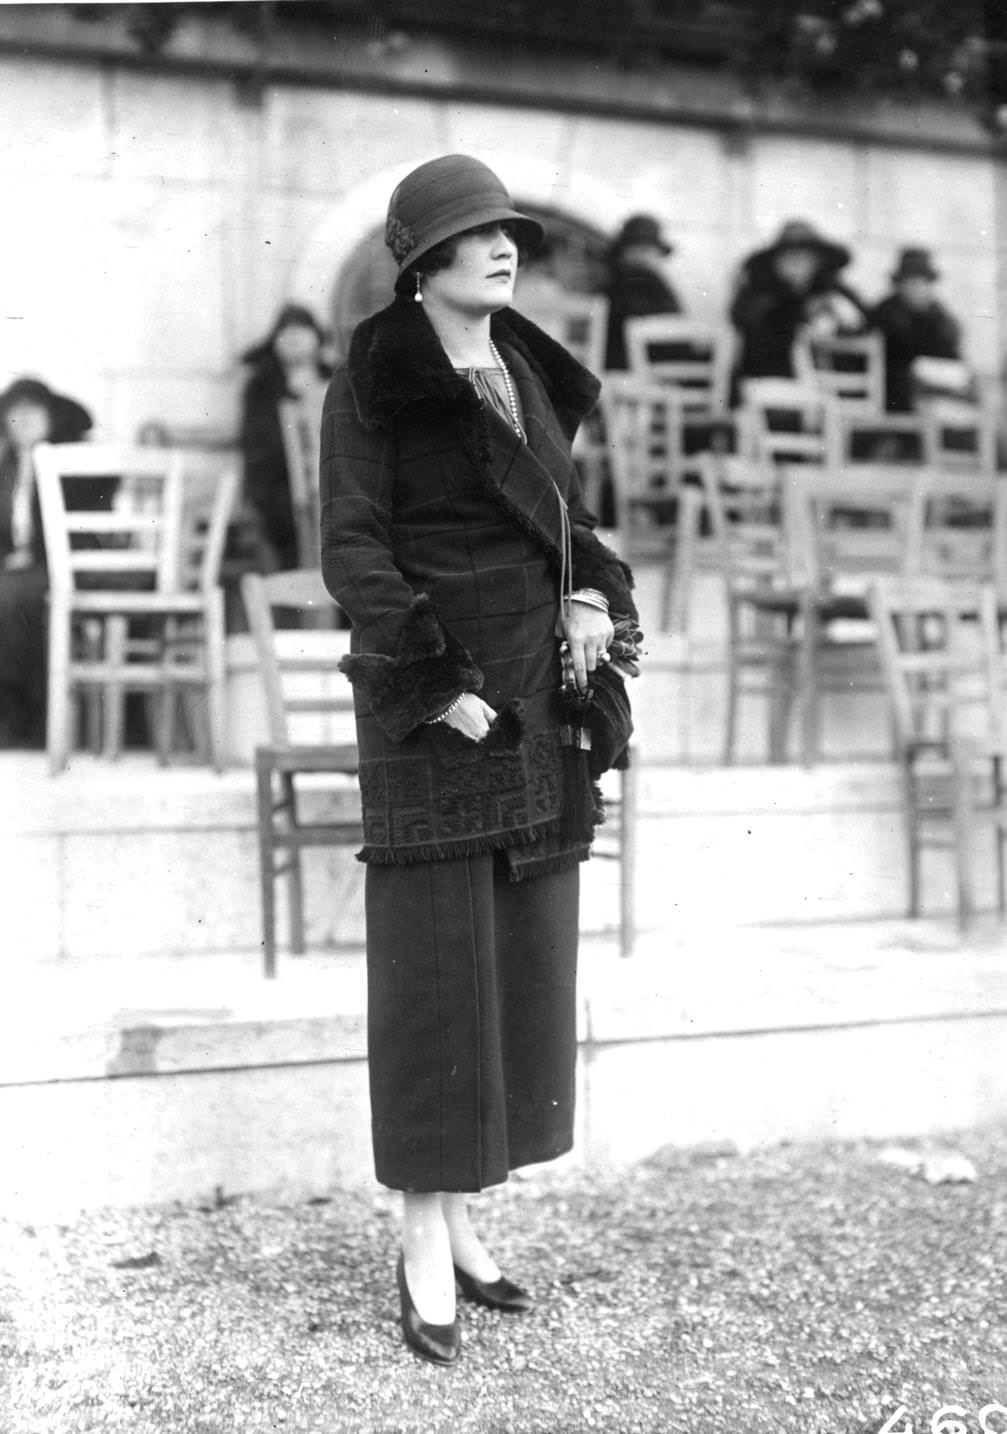 A tailored three quarter length jacket trimmed with fur on lapels and cuffs is worn over an ankle-length skirt. A cloche hat completes the ensemble, 1923